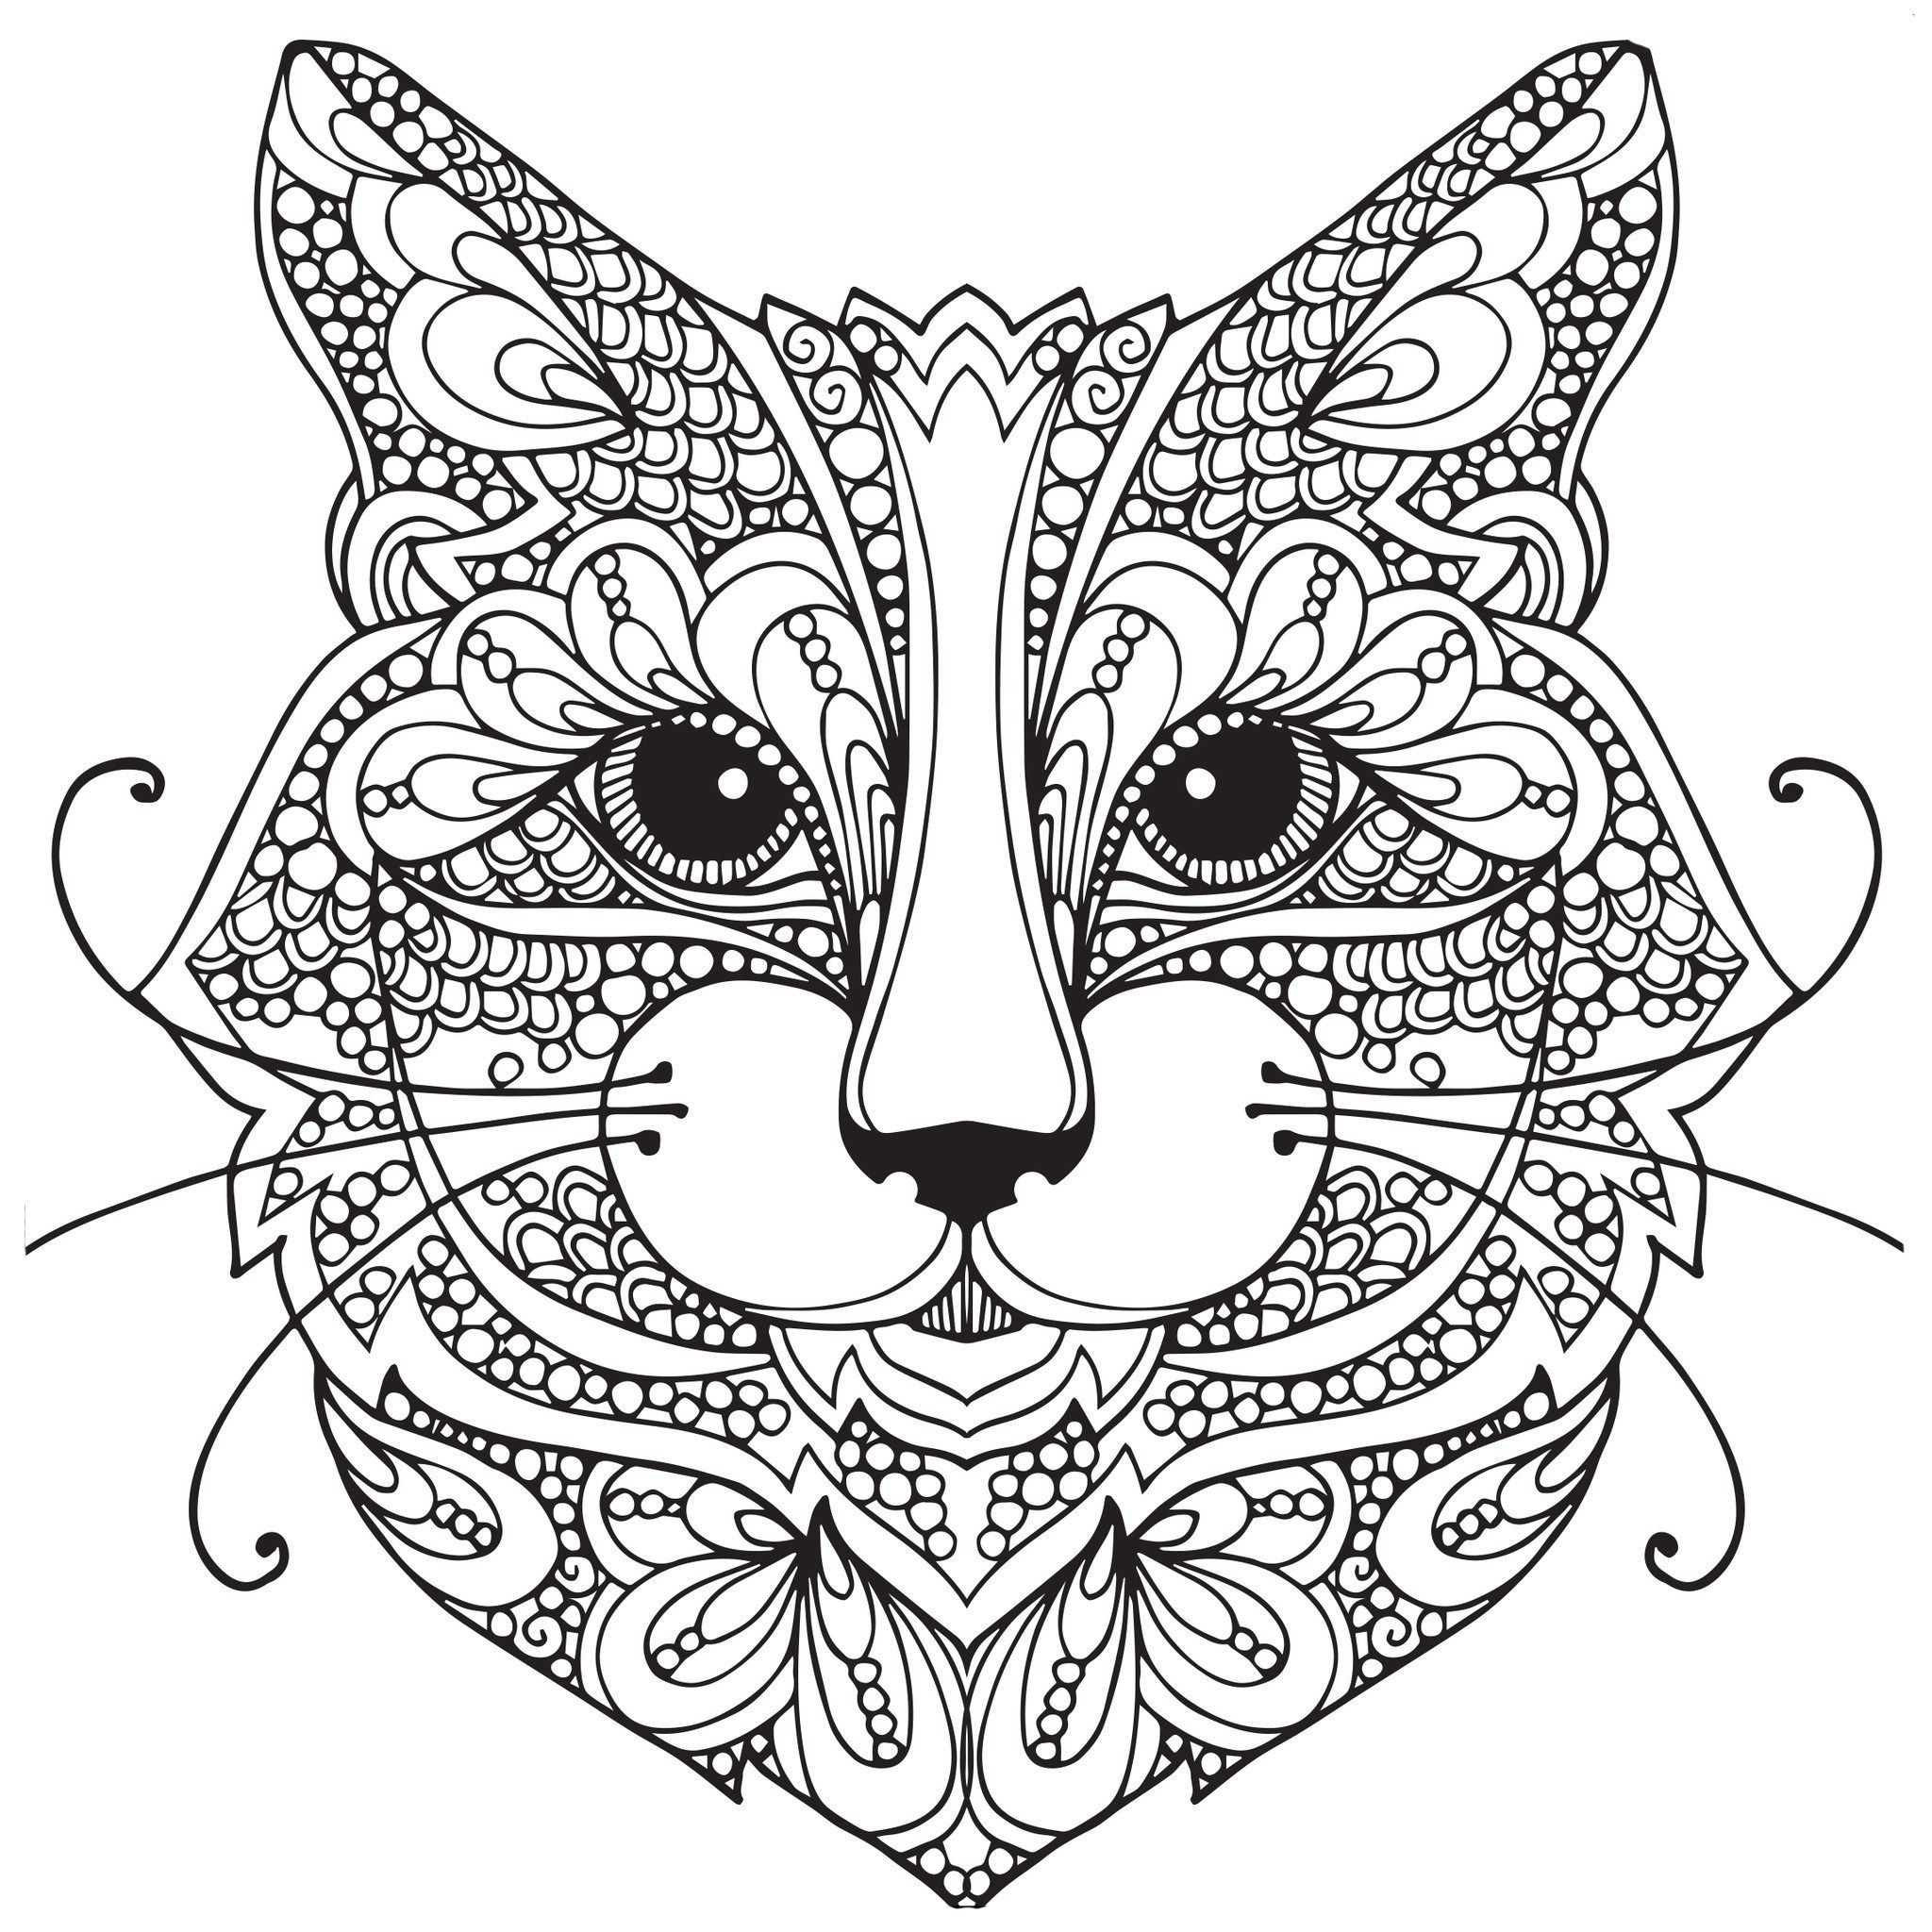 Cat Adult Coloring Book
 Adult Coloring Pages Cat 1 coloring pages